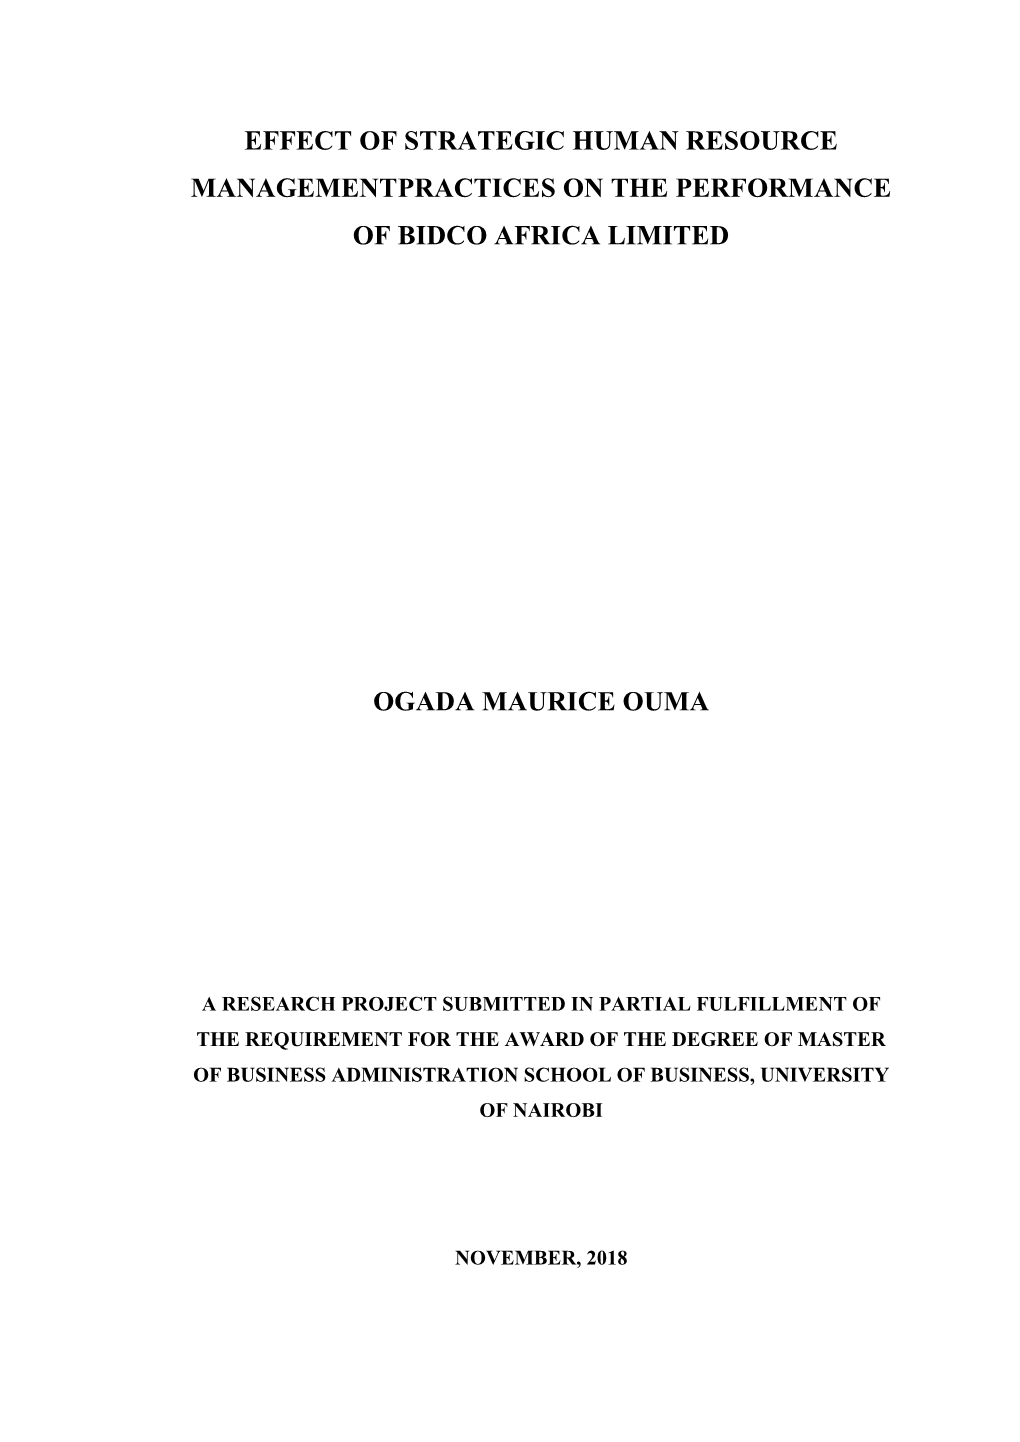 Effect of Strategic Human Resource Managementpractices on the Performance of Bidco Africa Limited